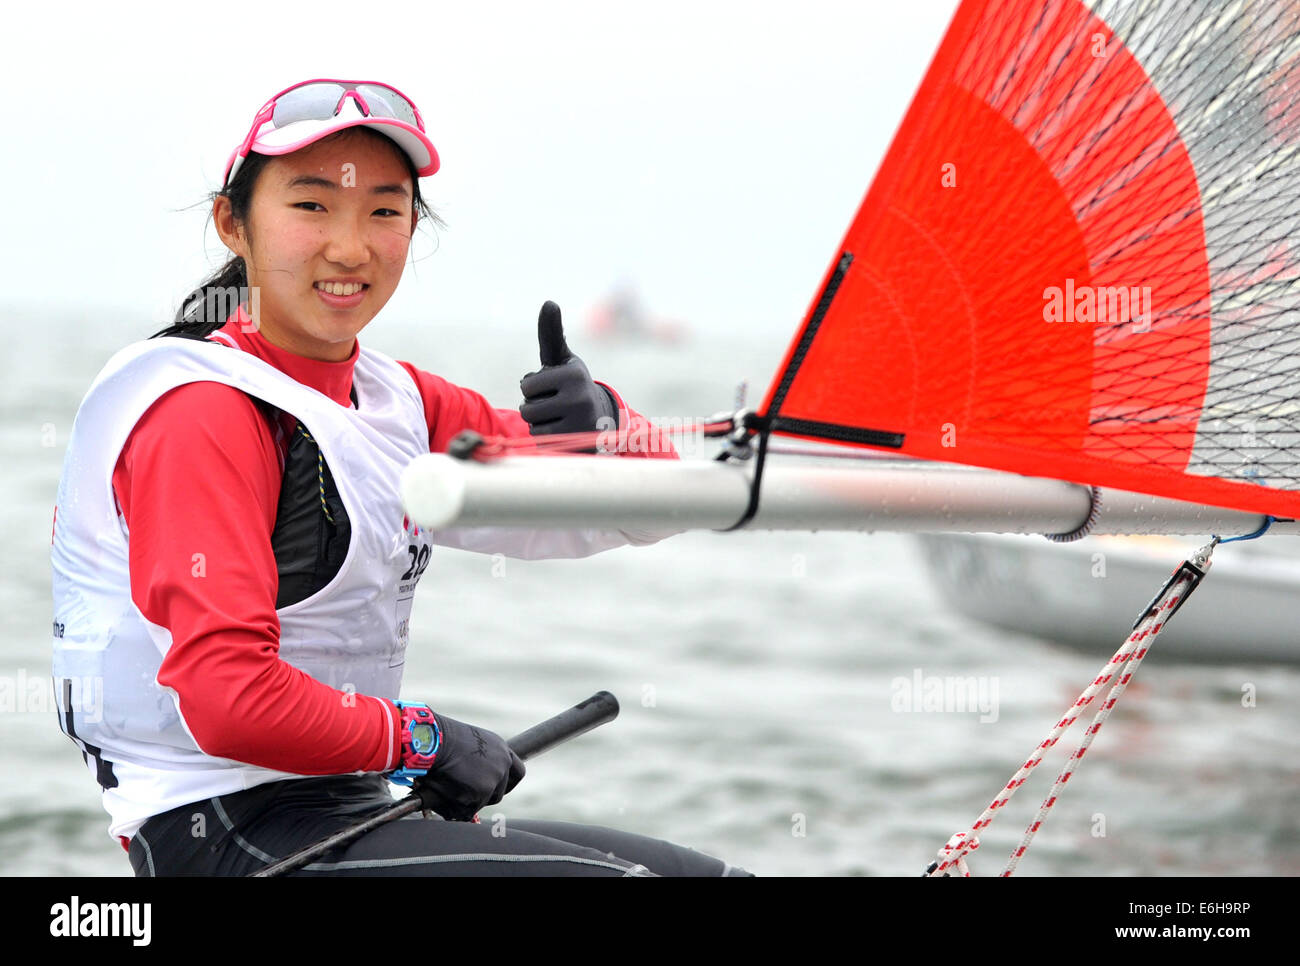 (SP)YOG-CHINA-NANJING-SAILING-WOMEN (140824) --Samantha Yom of Singapore celebrates after the Byte CII- Women?s One Person Dinghy Final Race of Sailing at the Nanjing 2014 Youth Olympic Games in Nanjing, capital of east China's Jiangsu Province, on August 24, 2014. Samantha Yom won the gold medal. (Xinhua/Yue Yuewei)(jyt) Stock Photo